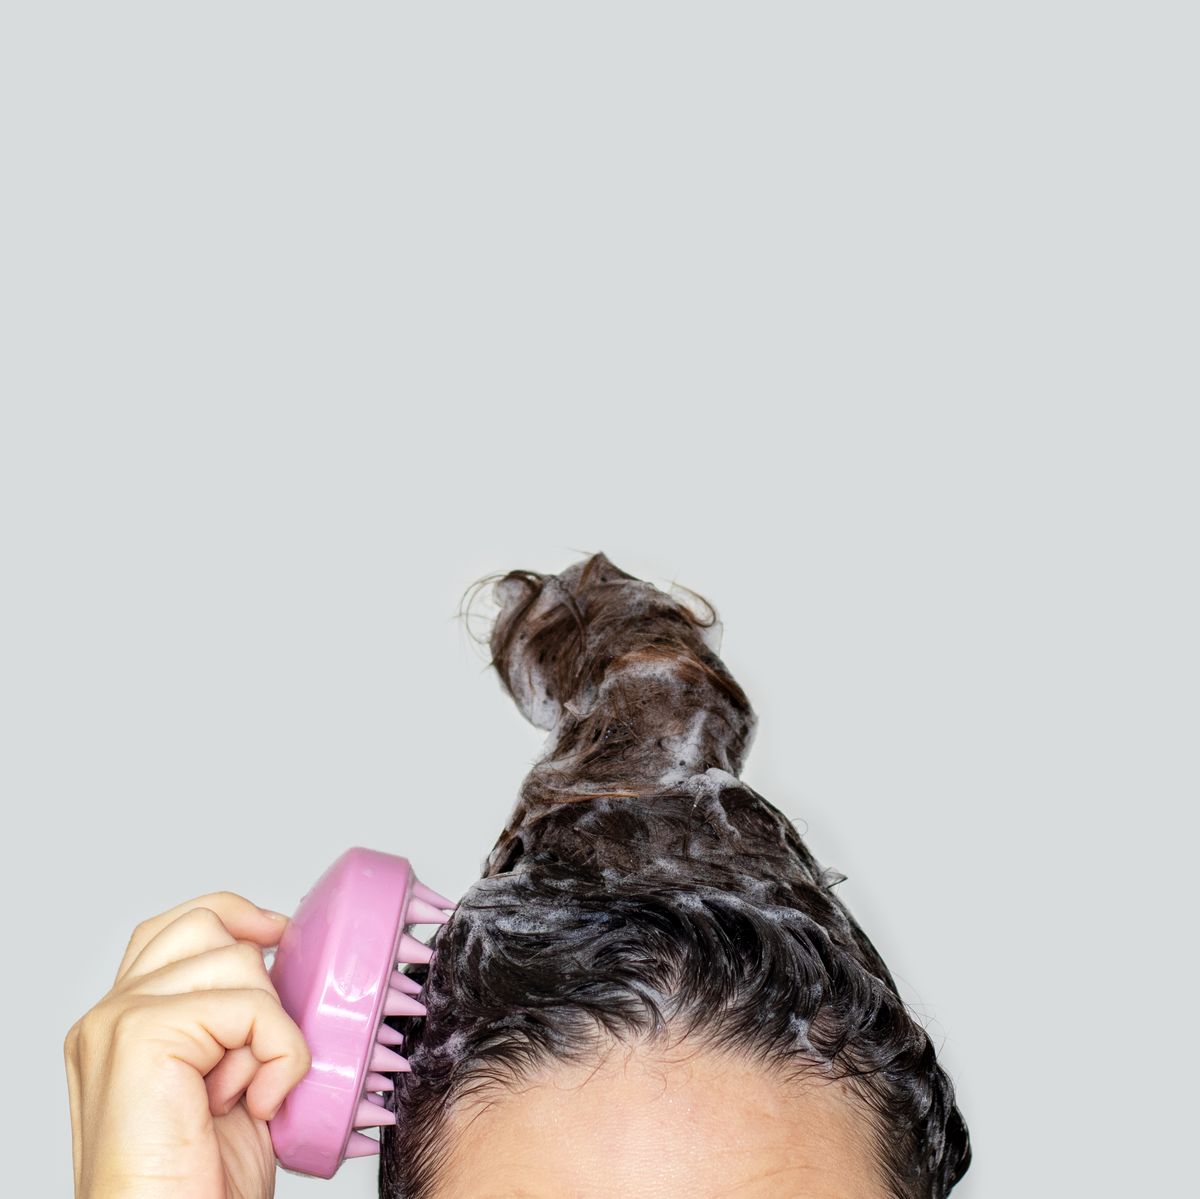 https://hips.hearstapps.com/hmg-prod/images/woman-using-silicone-pink-shampoo-brush-for-scalp-royalty-free-image-1679942200.jpg?crop=0.588xw:1.00xh;0.207xw,0&resize=1200:*